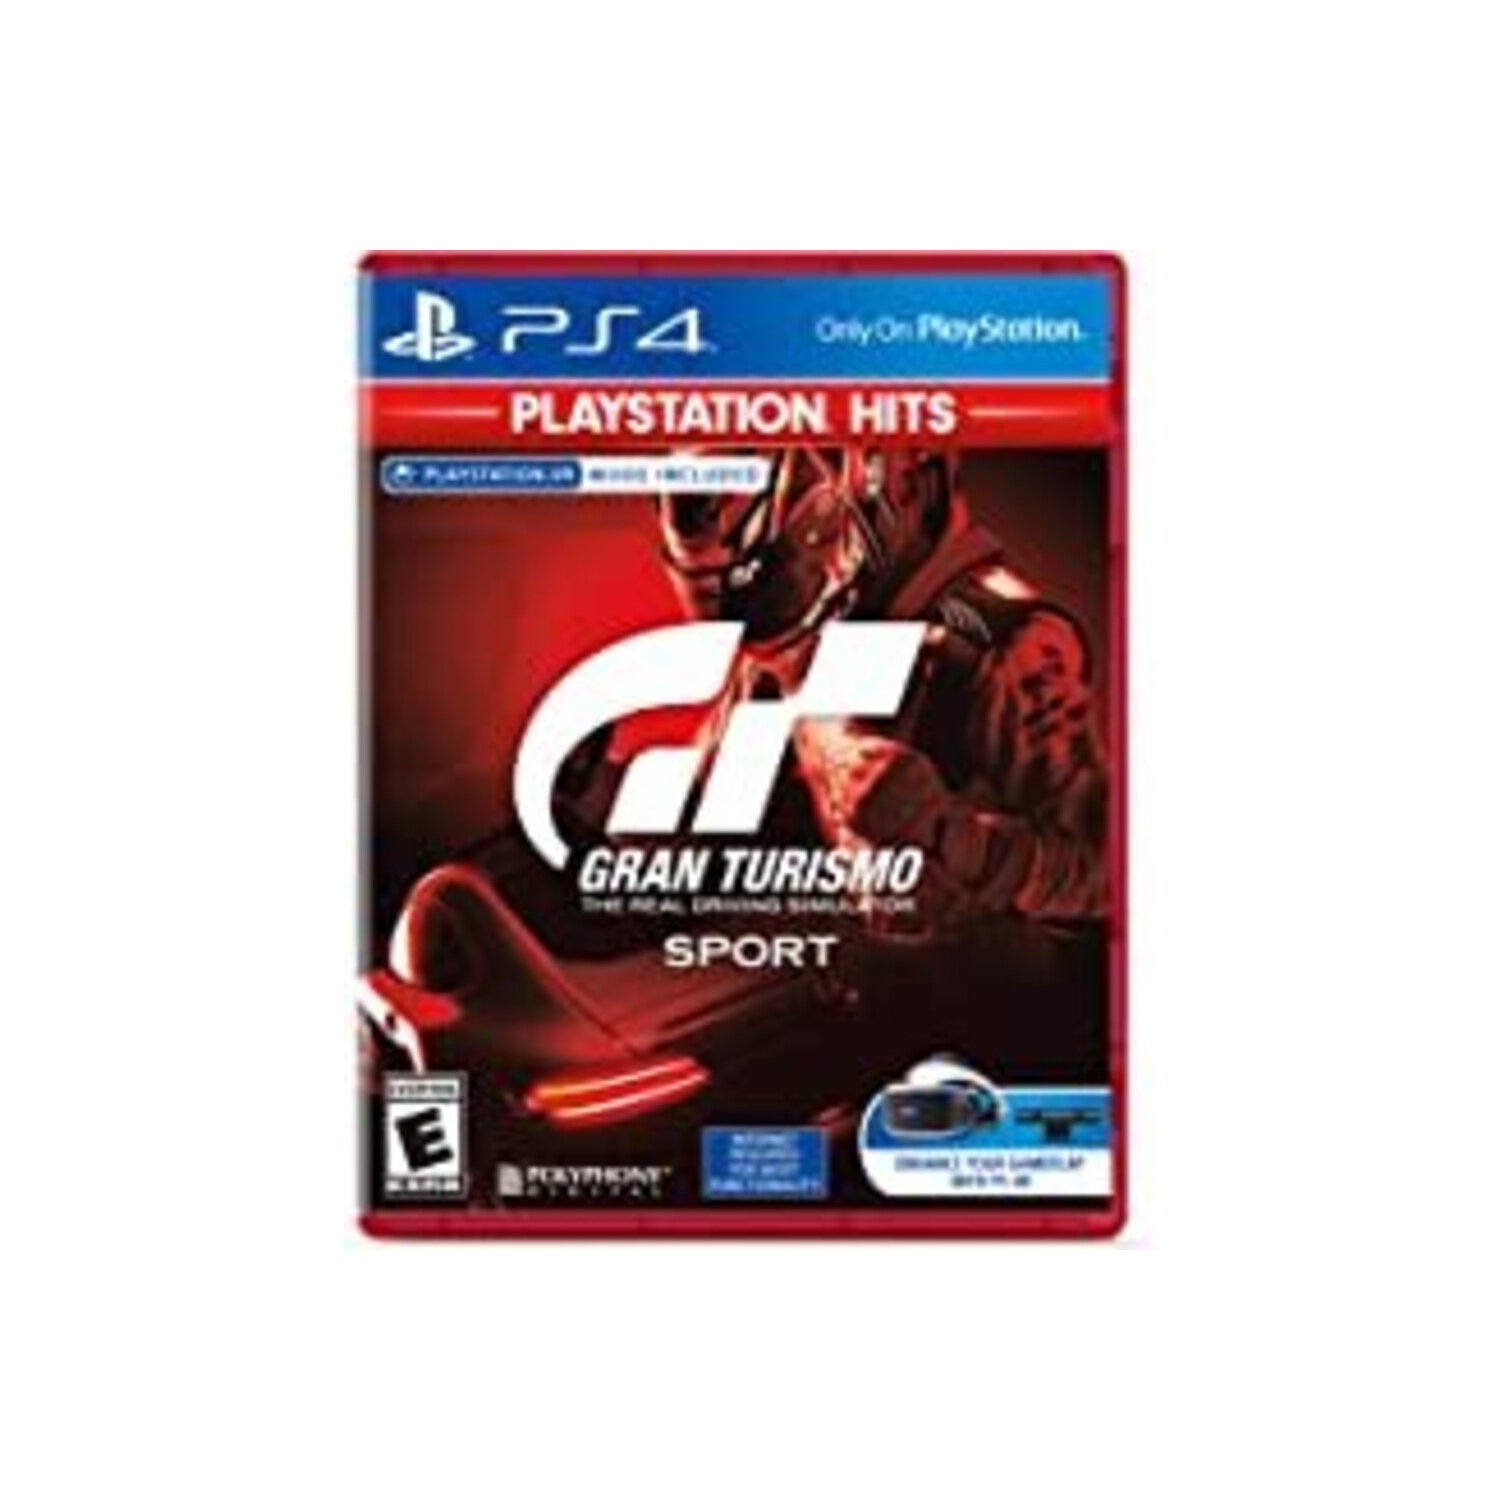 Gran Turismo Sport Hits for PlayStation 4 [VIDEOGAMES]